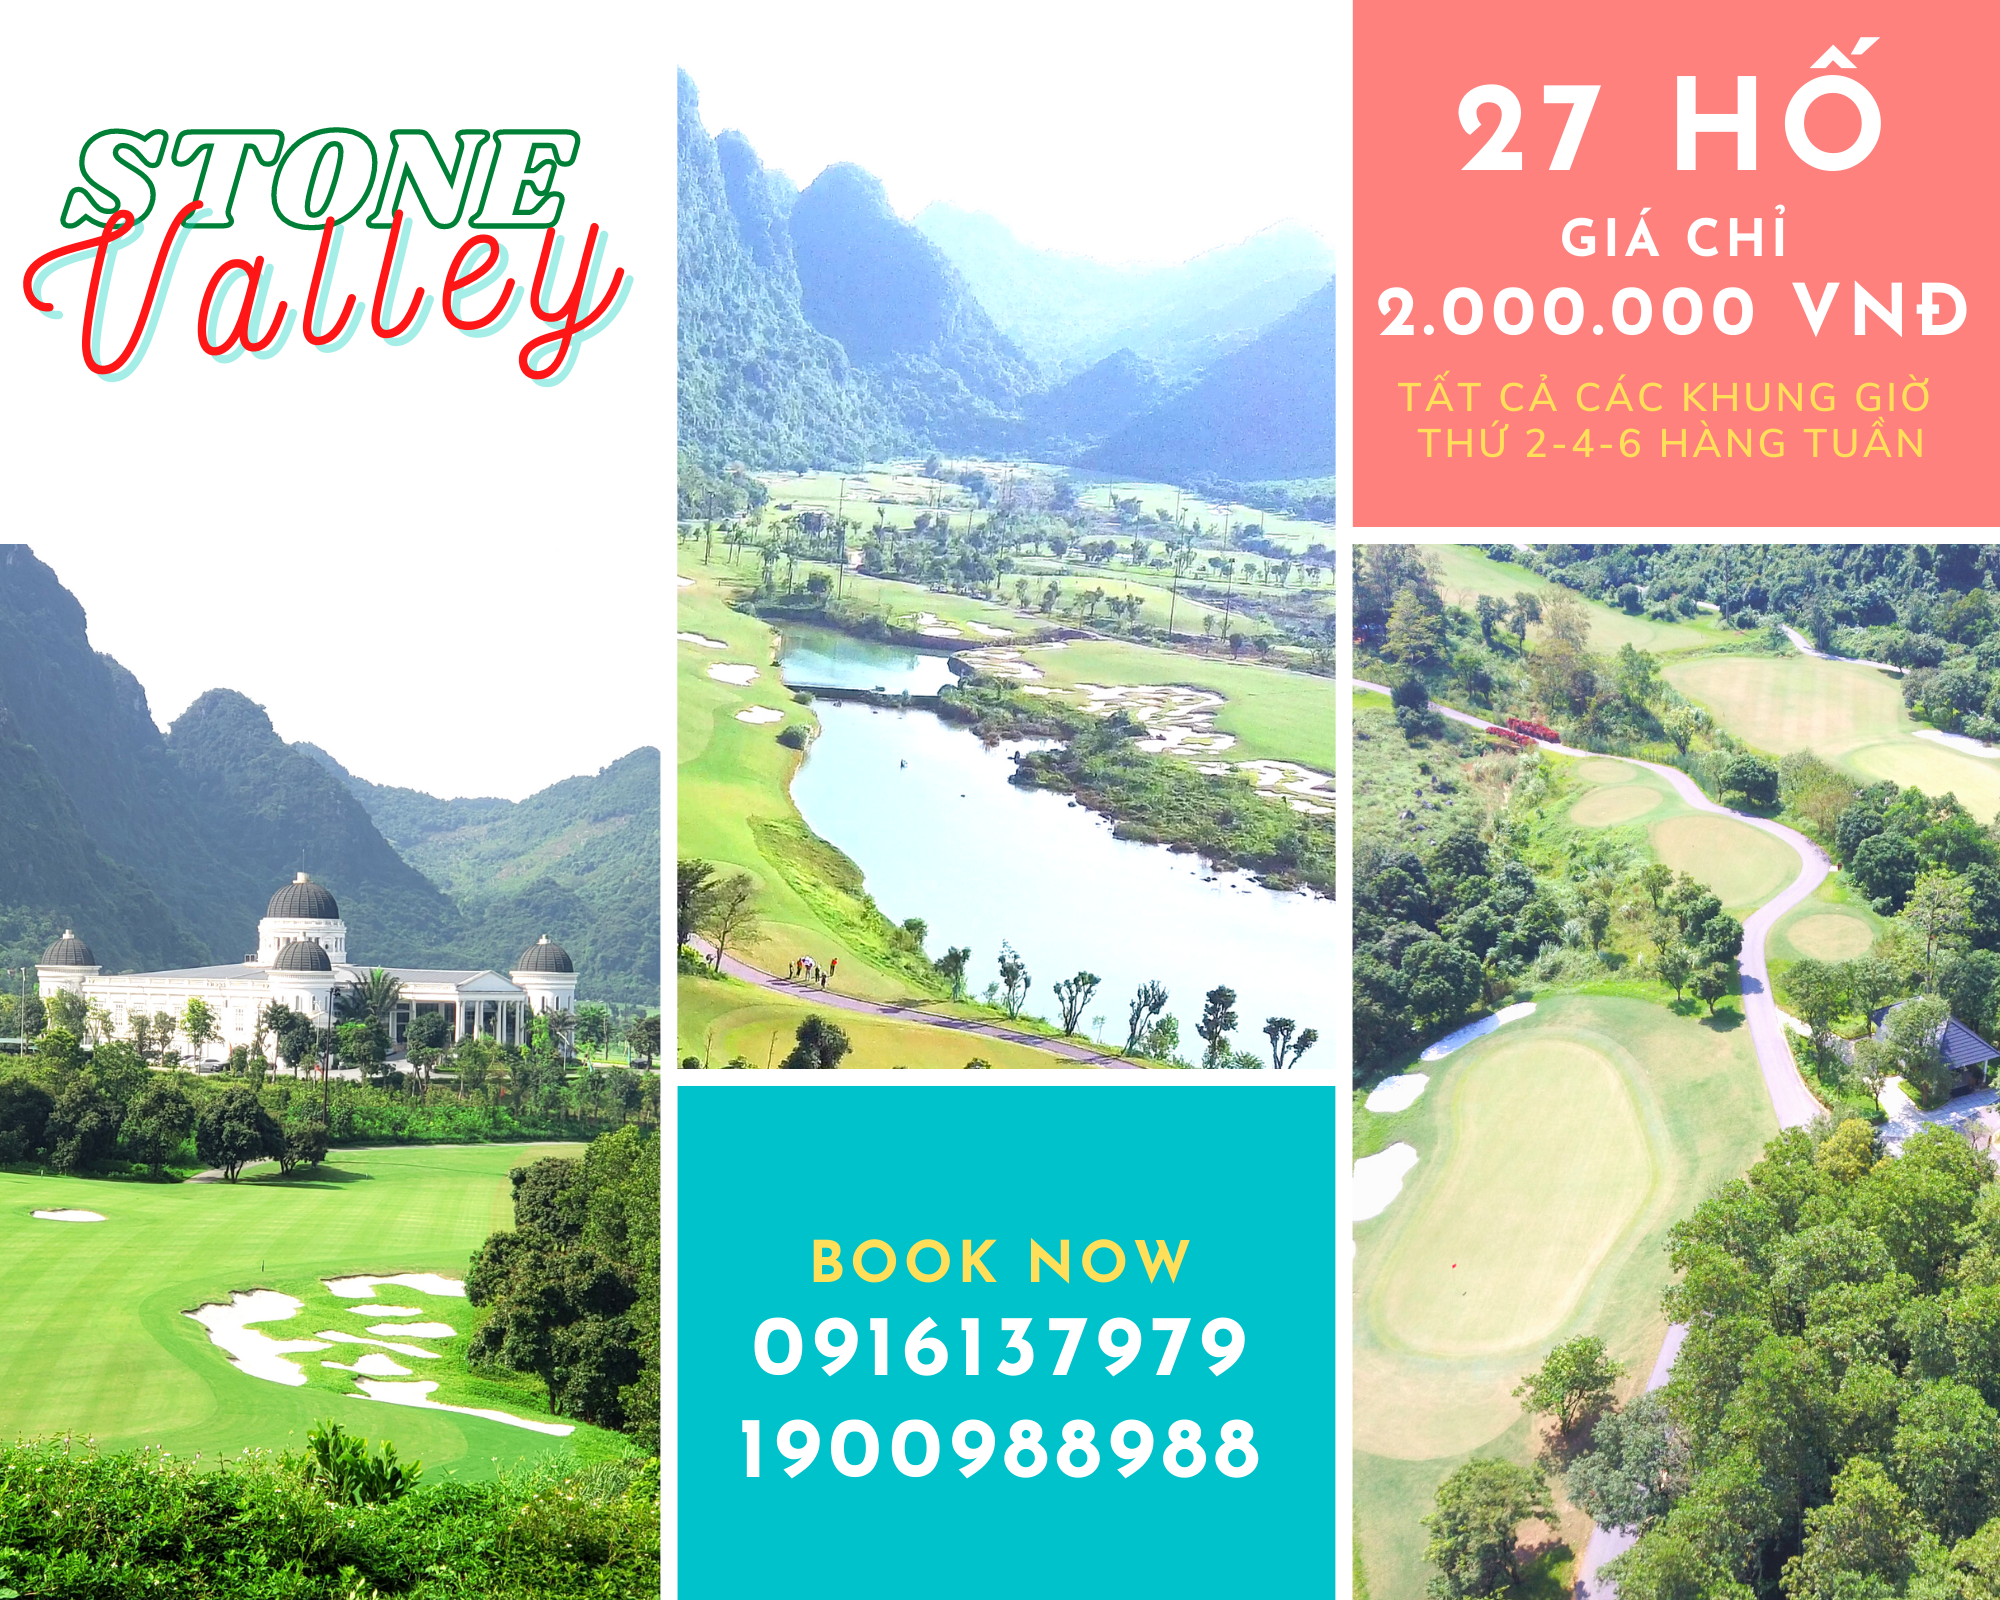  27 HOLES PROMOTIONS STONE VALLEY GOLF & RESORT